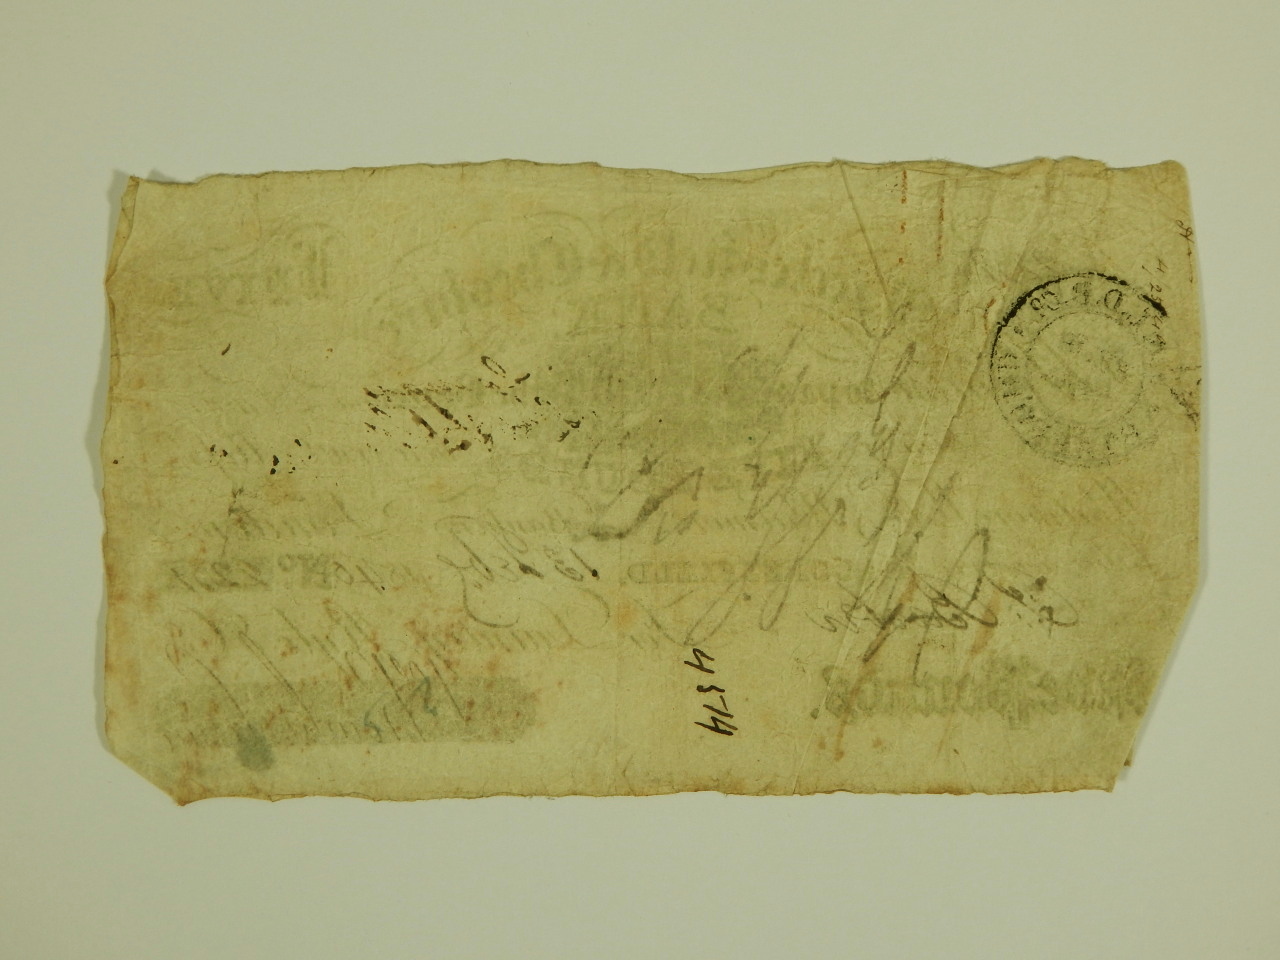 A Macclesfield and Cheshire Bank £5 note, dated 1840, numbered 2251 - Image 2 of 2